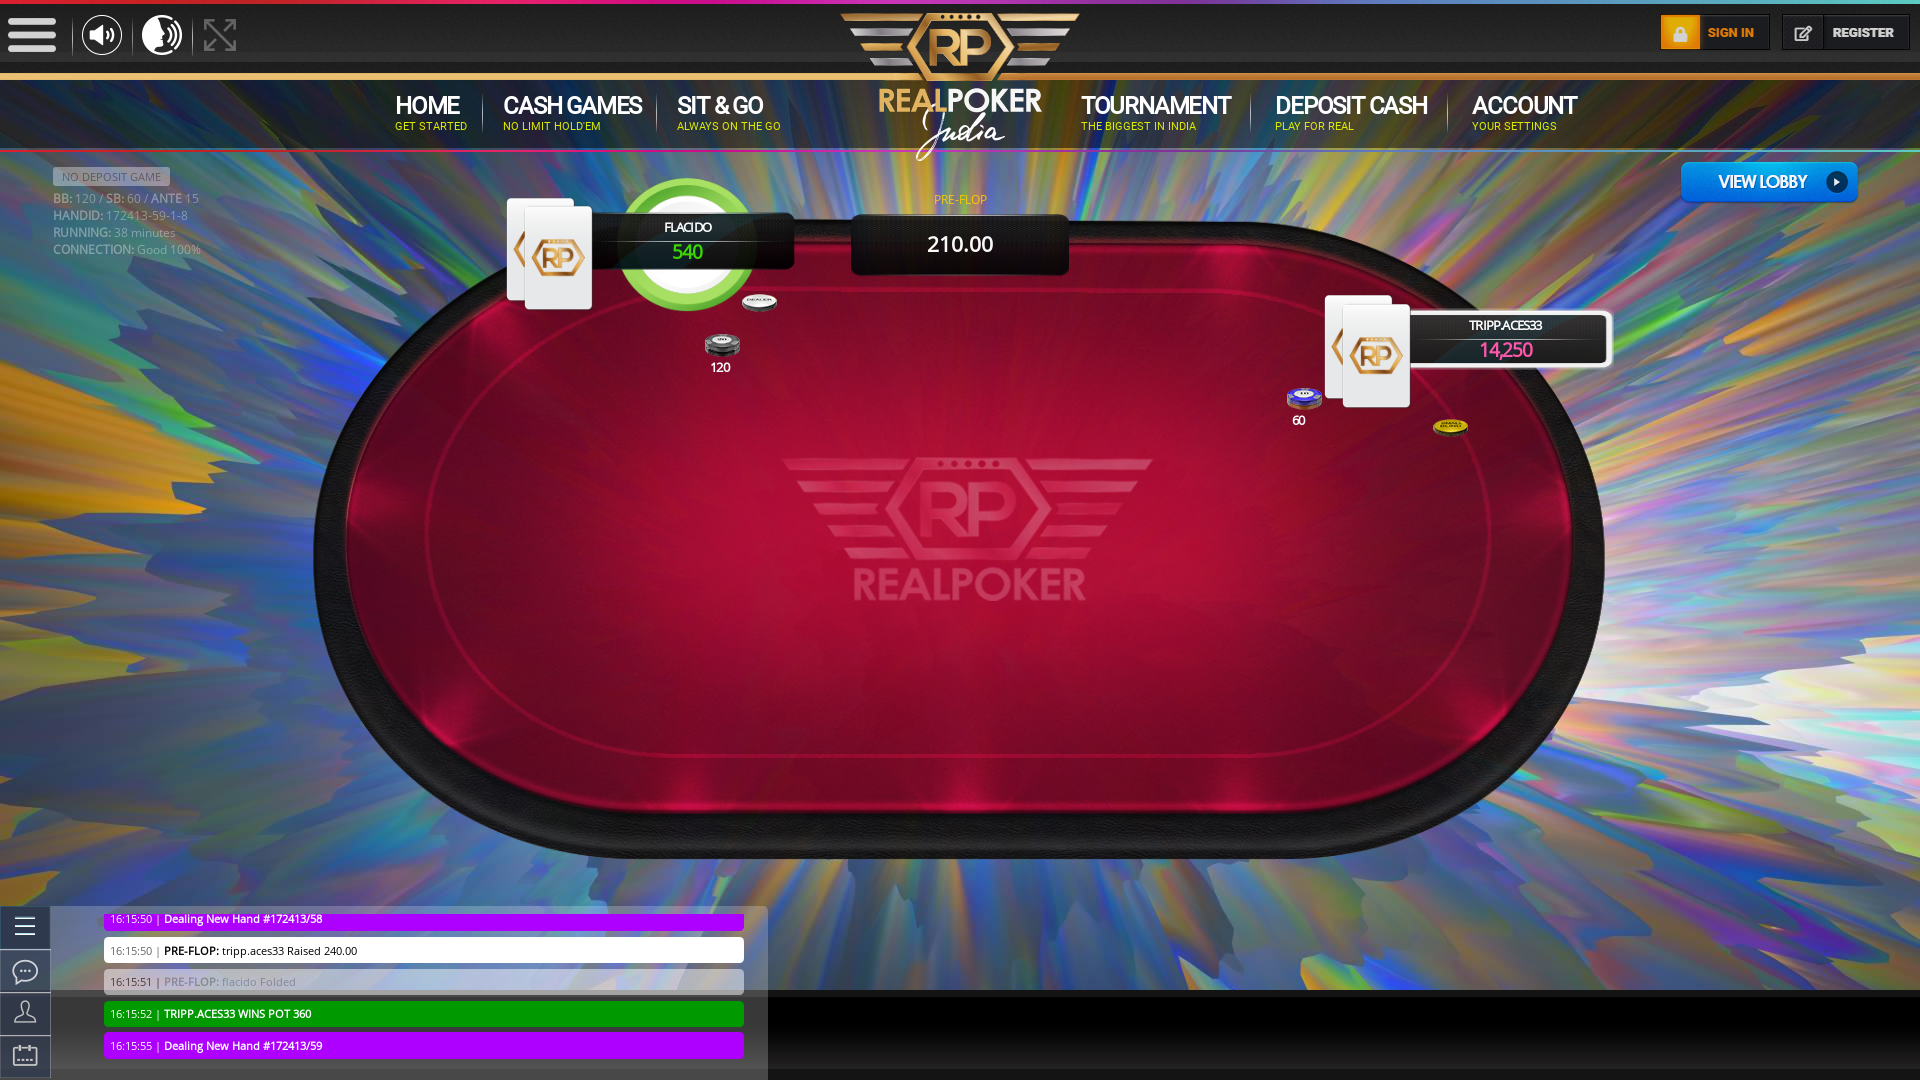 Real poker 10 player table in the 38th minute of the match